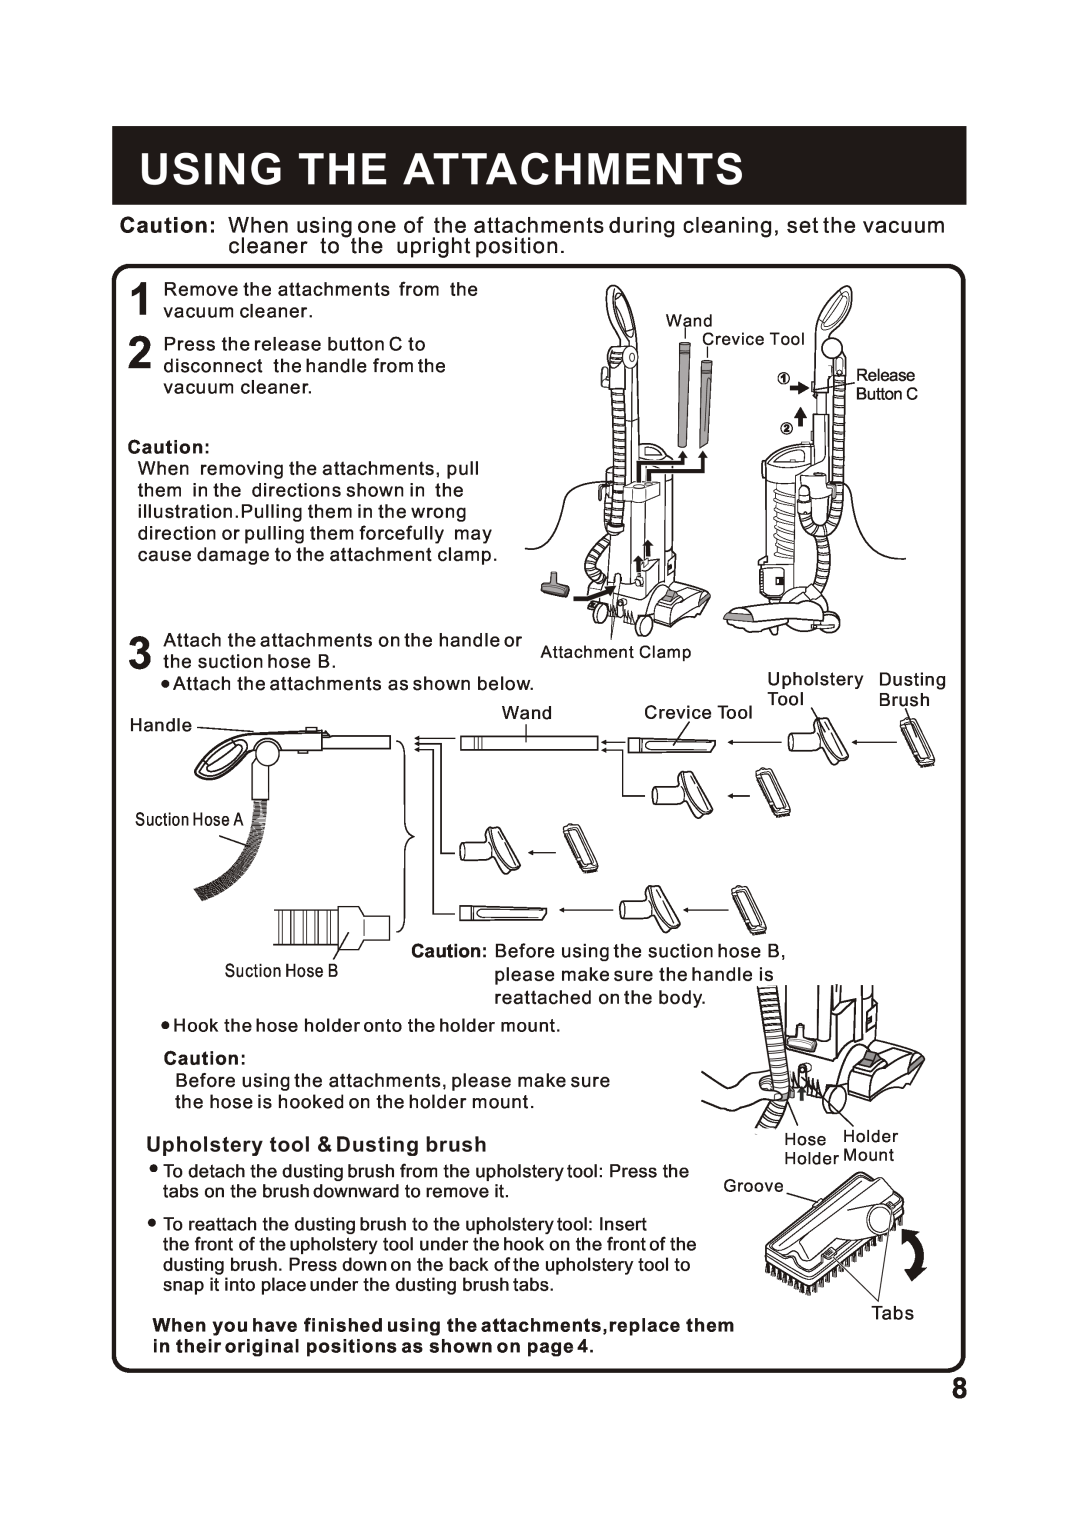 Fantom Vacuum FM743H instruction manual Using The Attachments, Upholstery tool & Dusting brush 